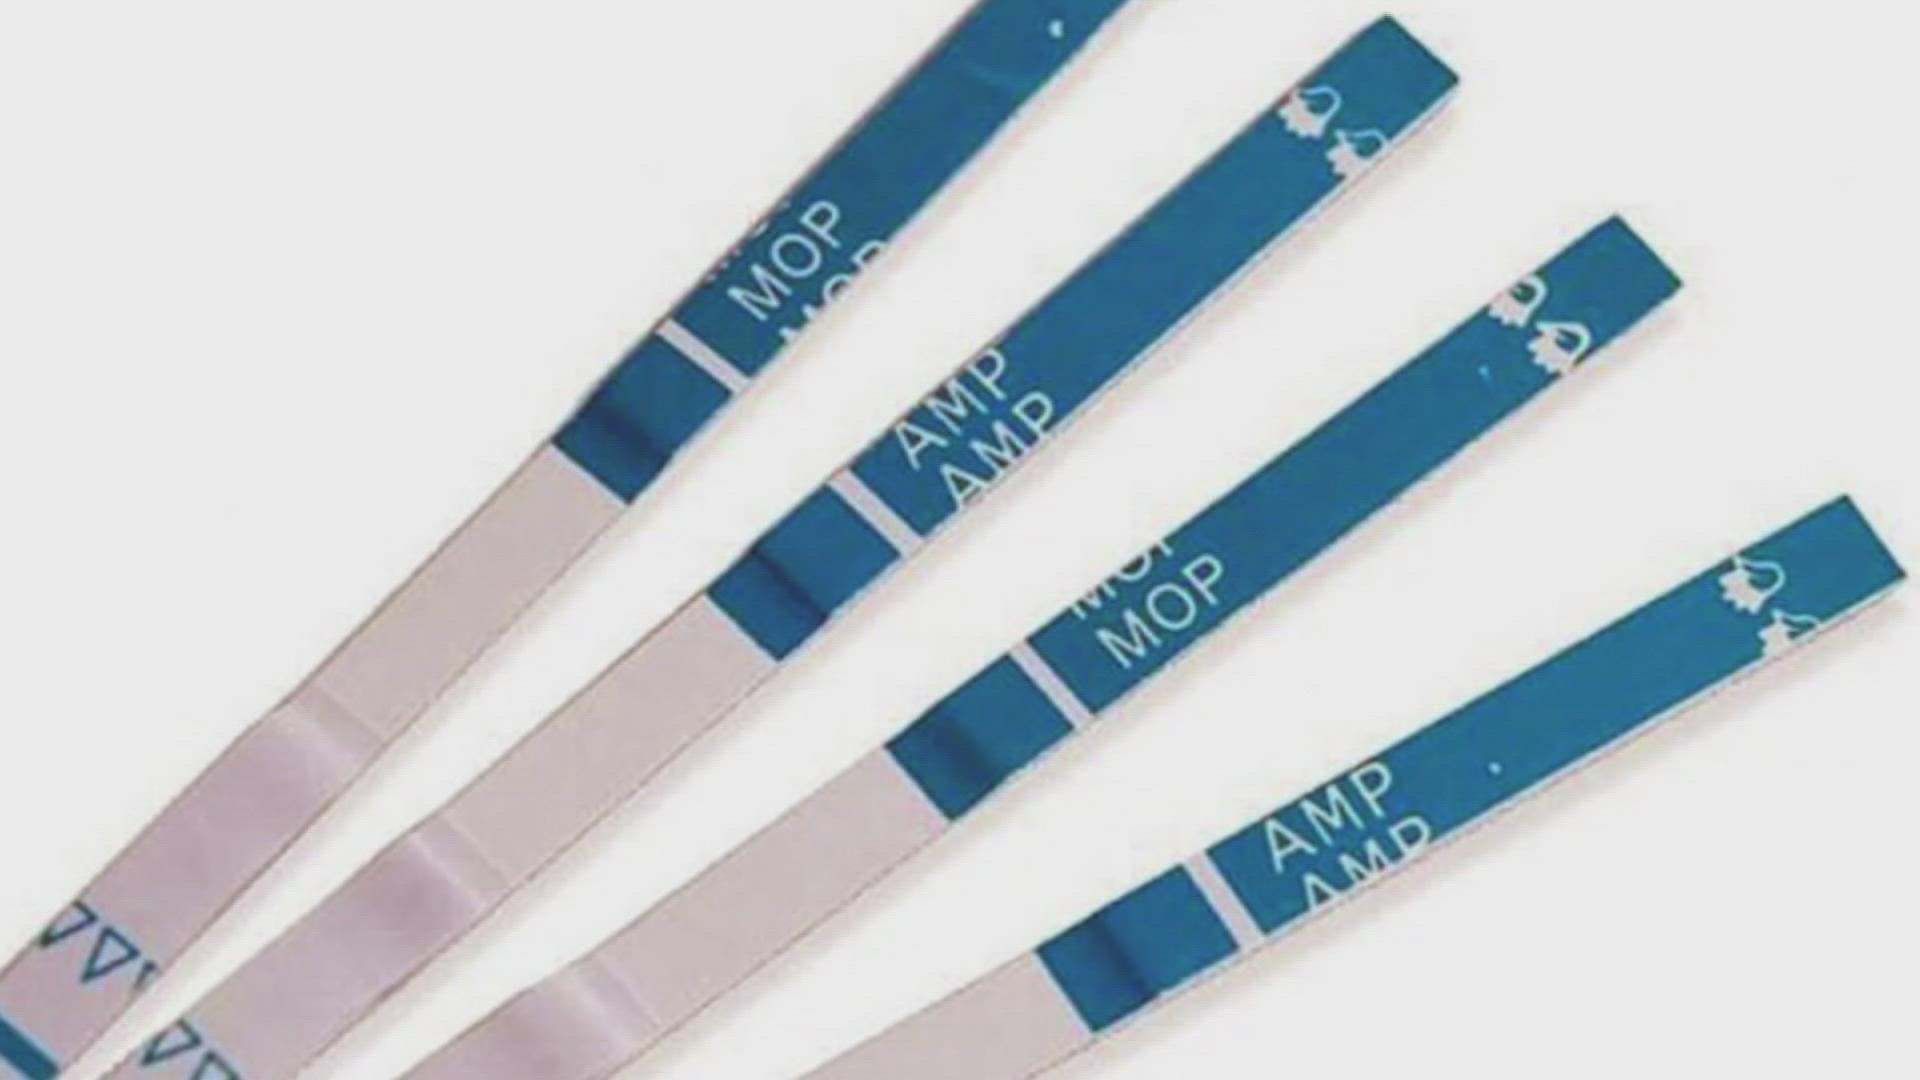 A pilot program in Tennessee showed 81% of people who used the test strips changed their behavior. State leaders hope that trend will continue.